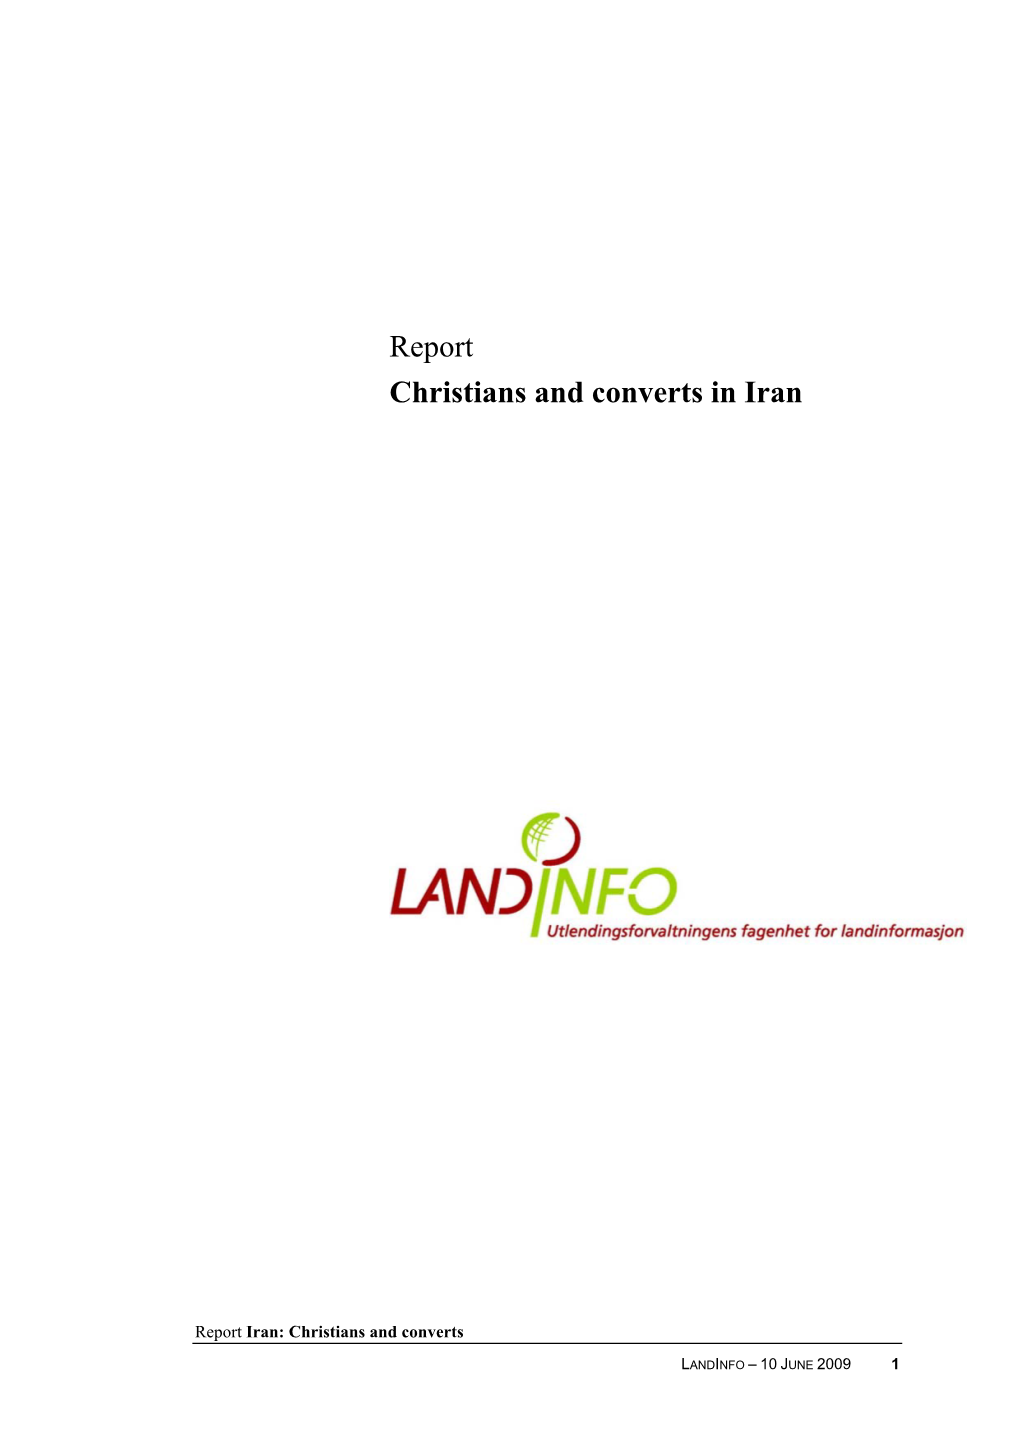 Report Christians and Converts in Iran